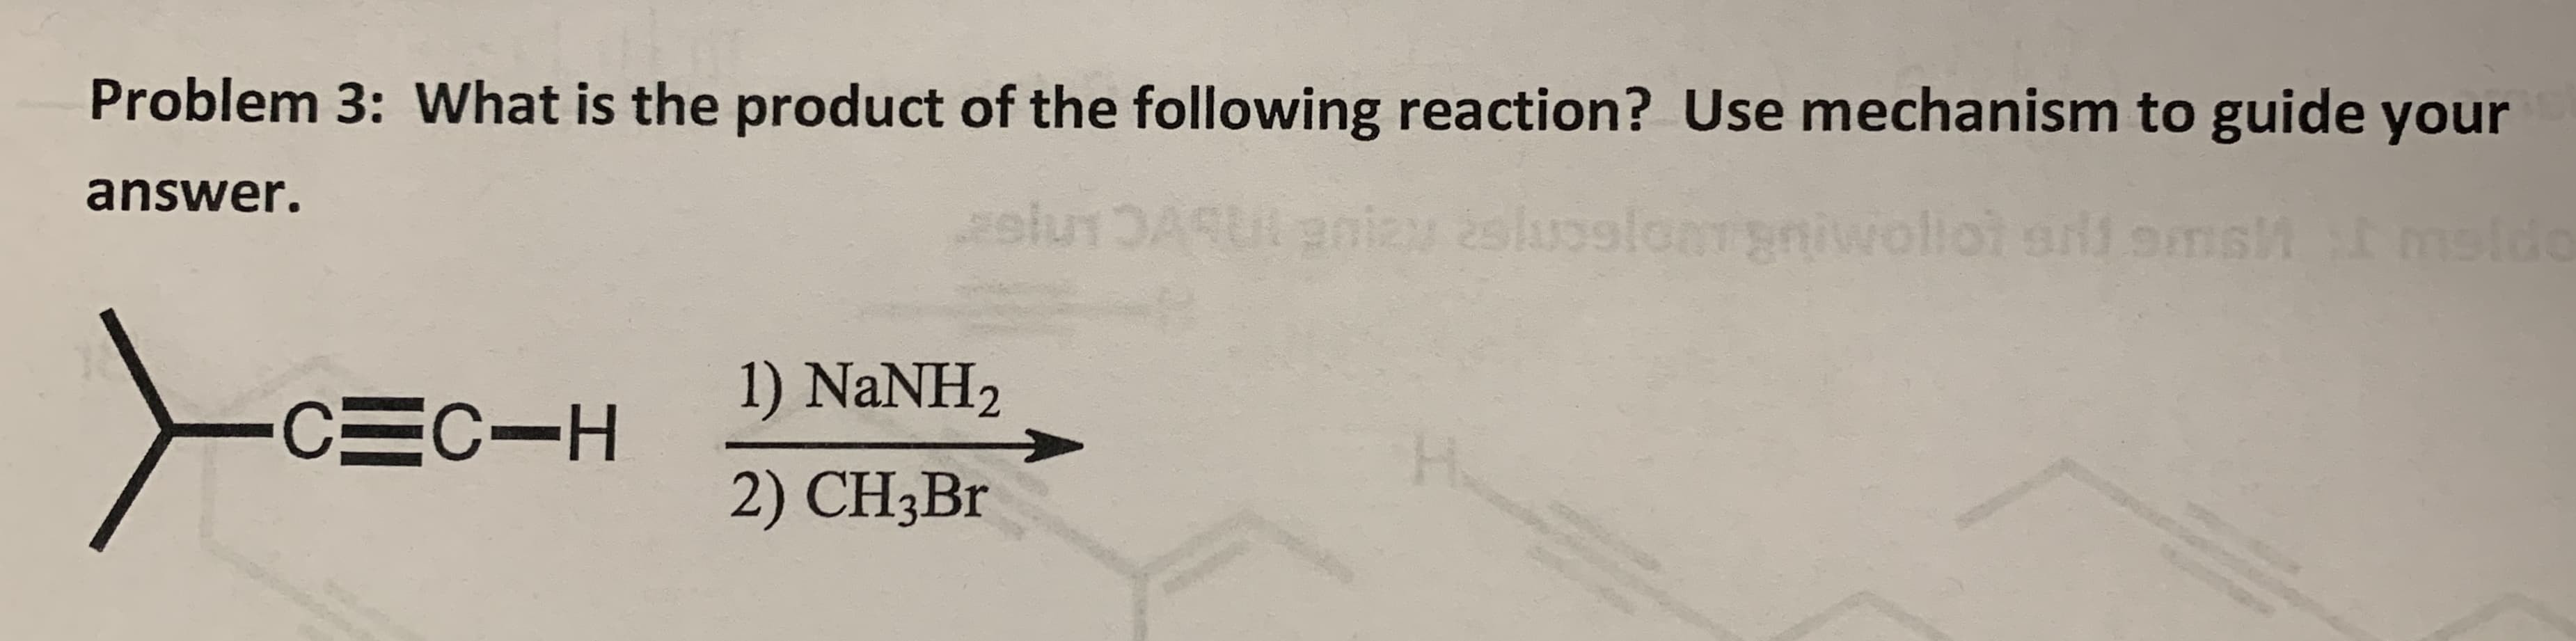 Problem 3: What is the product of the following reaction? Use mechanism to guide your
answer.
slu1DAUenizy 2sluoelomgniwollot allomsh
mslde
1) NaNH2
CEC-H
2) CH3B.
